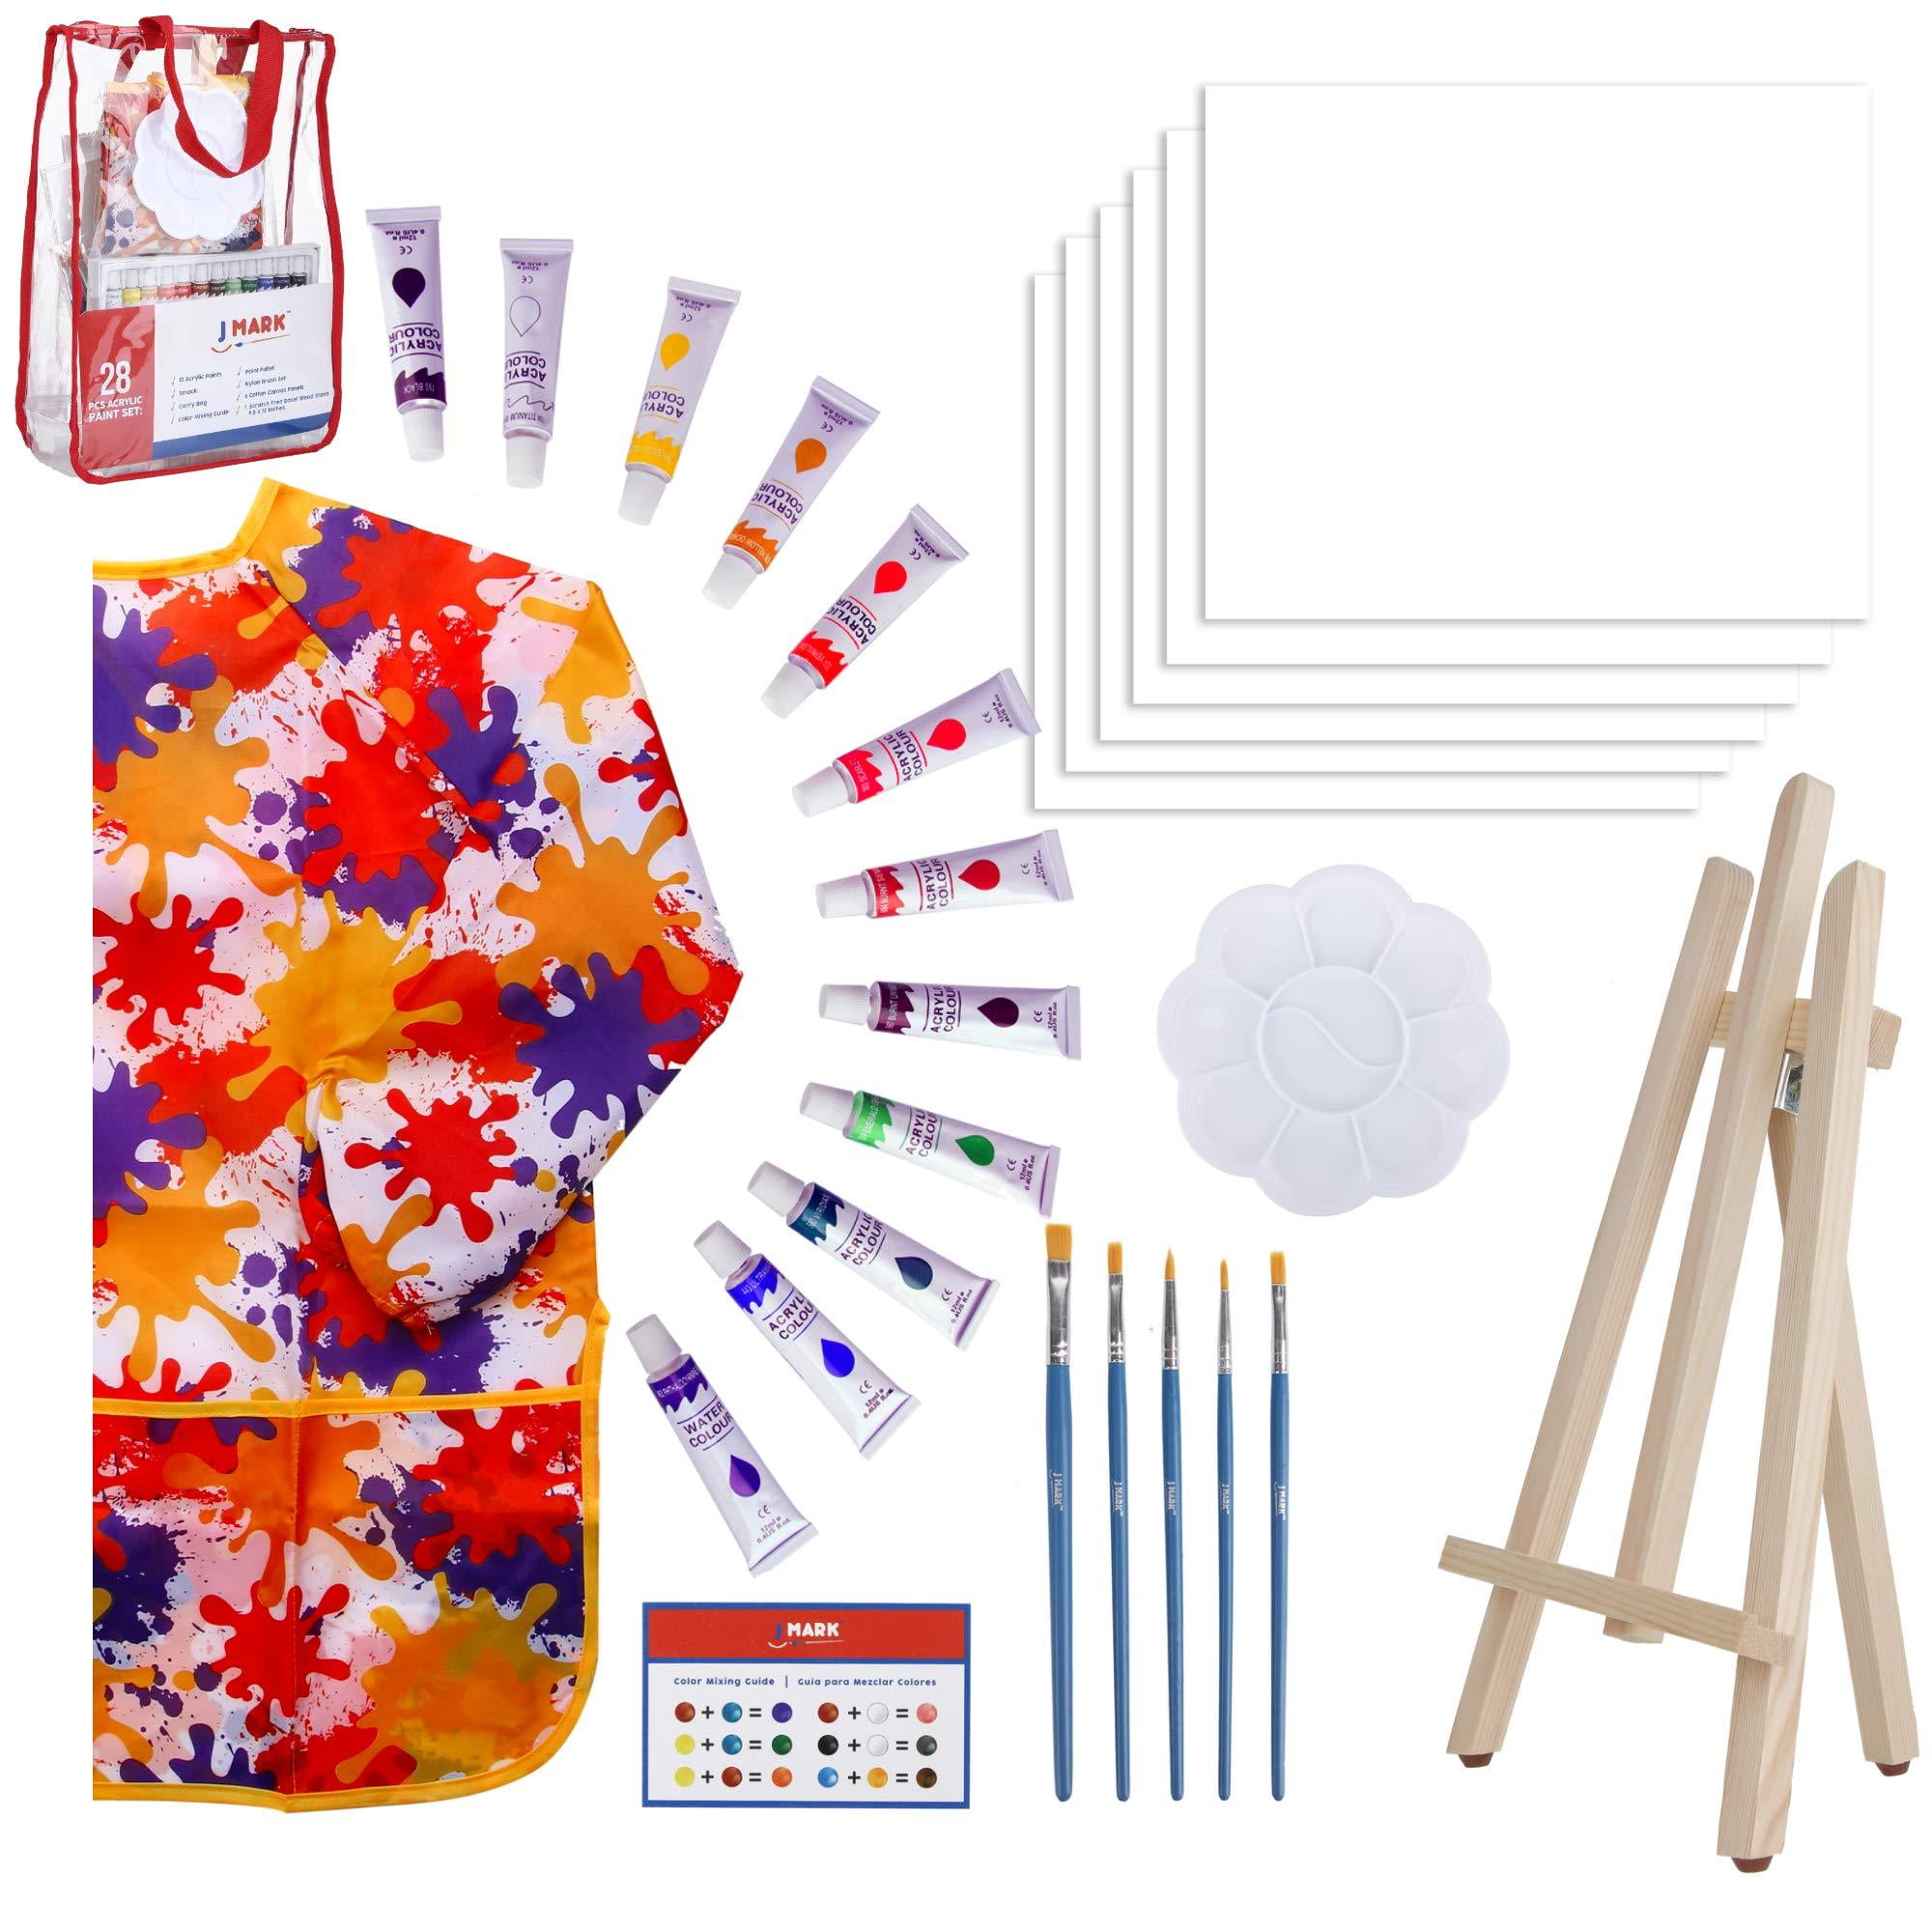 Paint Easel Kids Art Set&sbquo;&Auml;&igrave; 28-Piece Acrylic Painting Supplies Kit with Storage Bag, 12 Non Toxic Washable Paints, 1 Scratch Free Wood Easel, 6 Blank Canvases 8 x 10 inches, 5 Brushes, 10